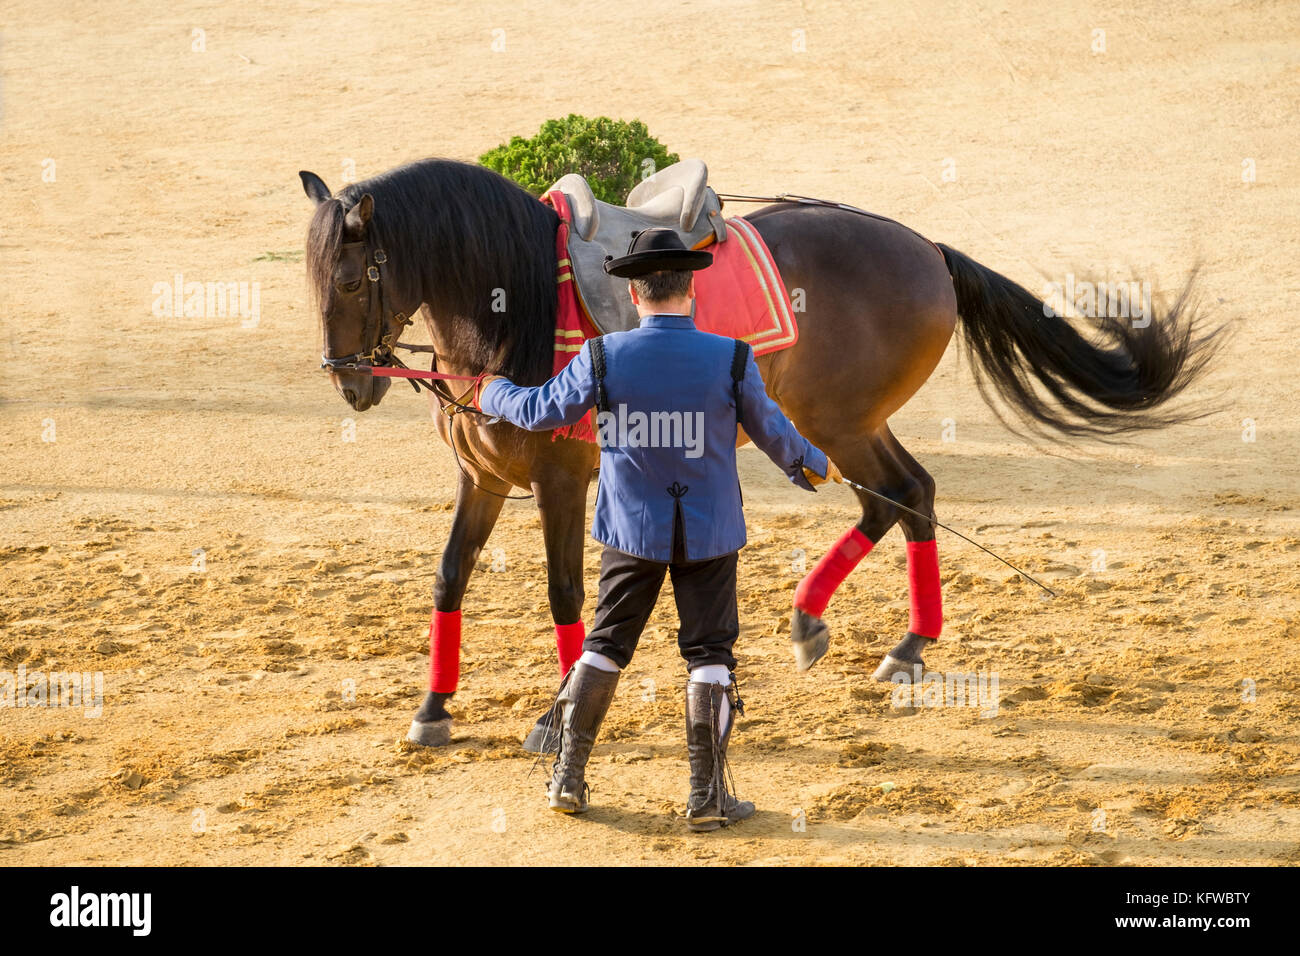 Performing Andalusian dancing horse and rider. Andalusia, Spain Stock Photo